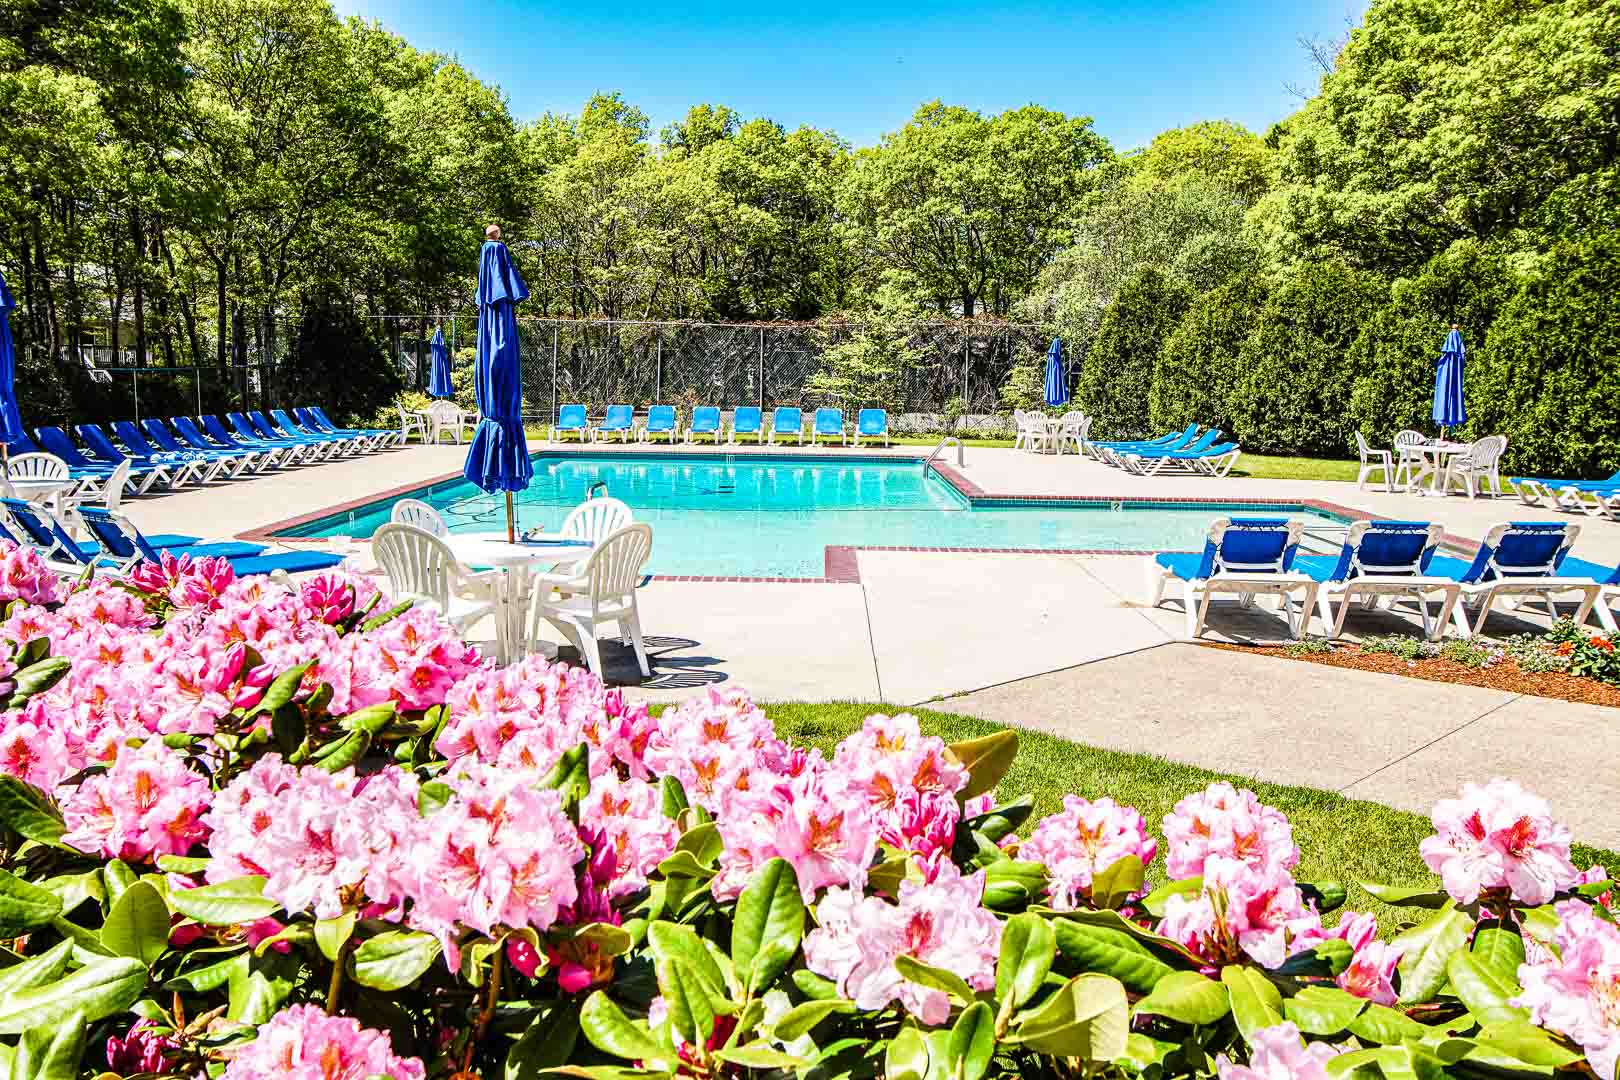 A beautiful view of the outdoor swimming pool at VRI's Sea Mist Resort in Massachusetts.